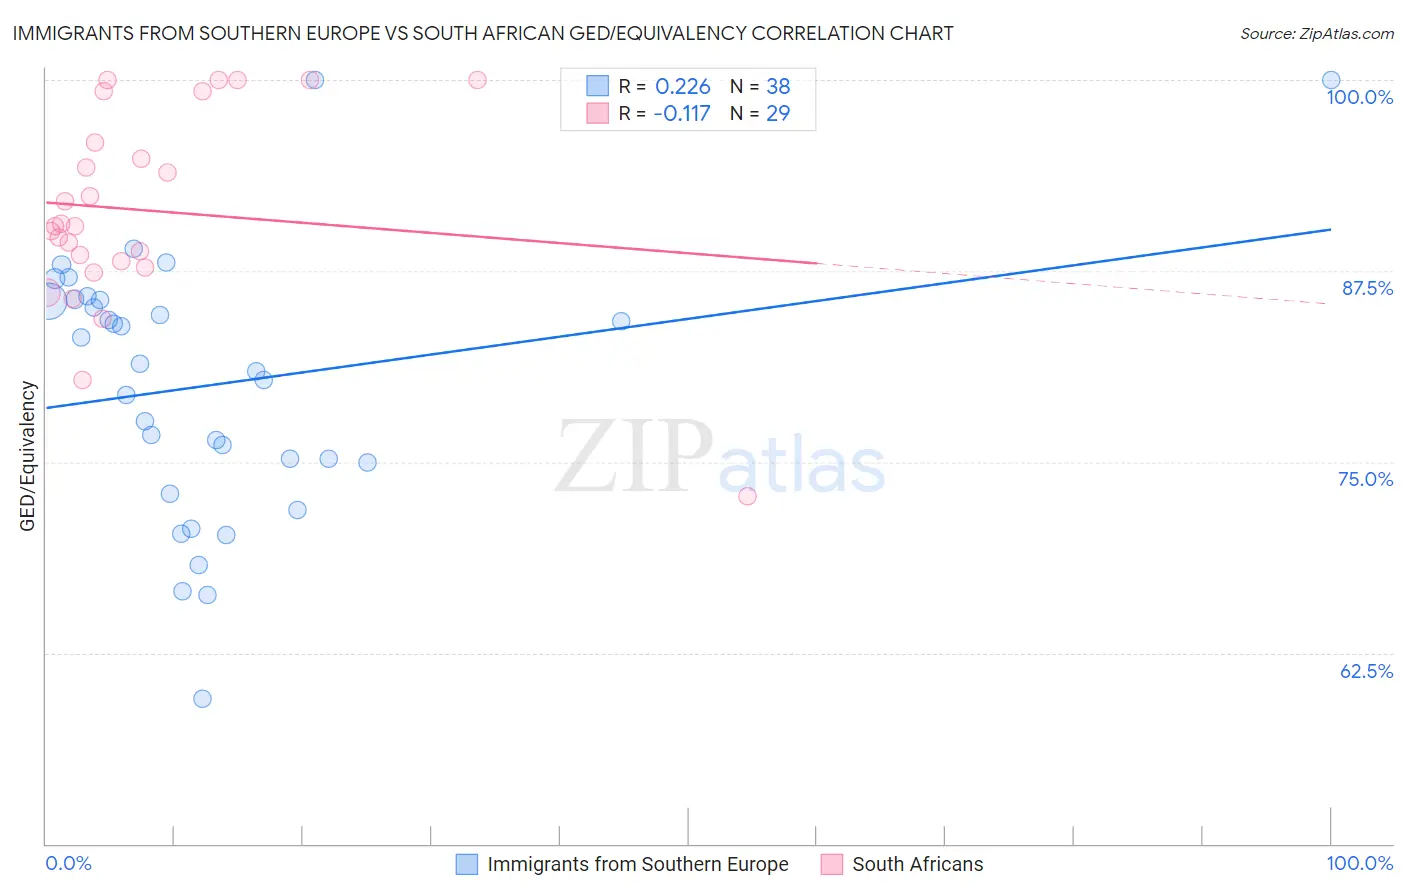 Immigrants from Southern Europe vs South African GED/Equivalency